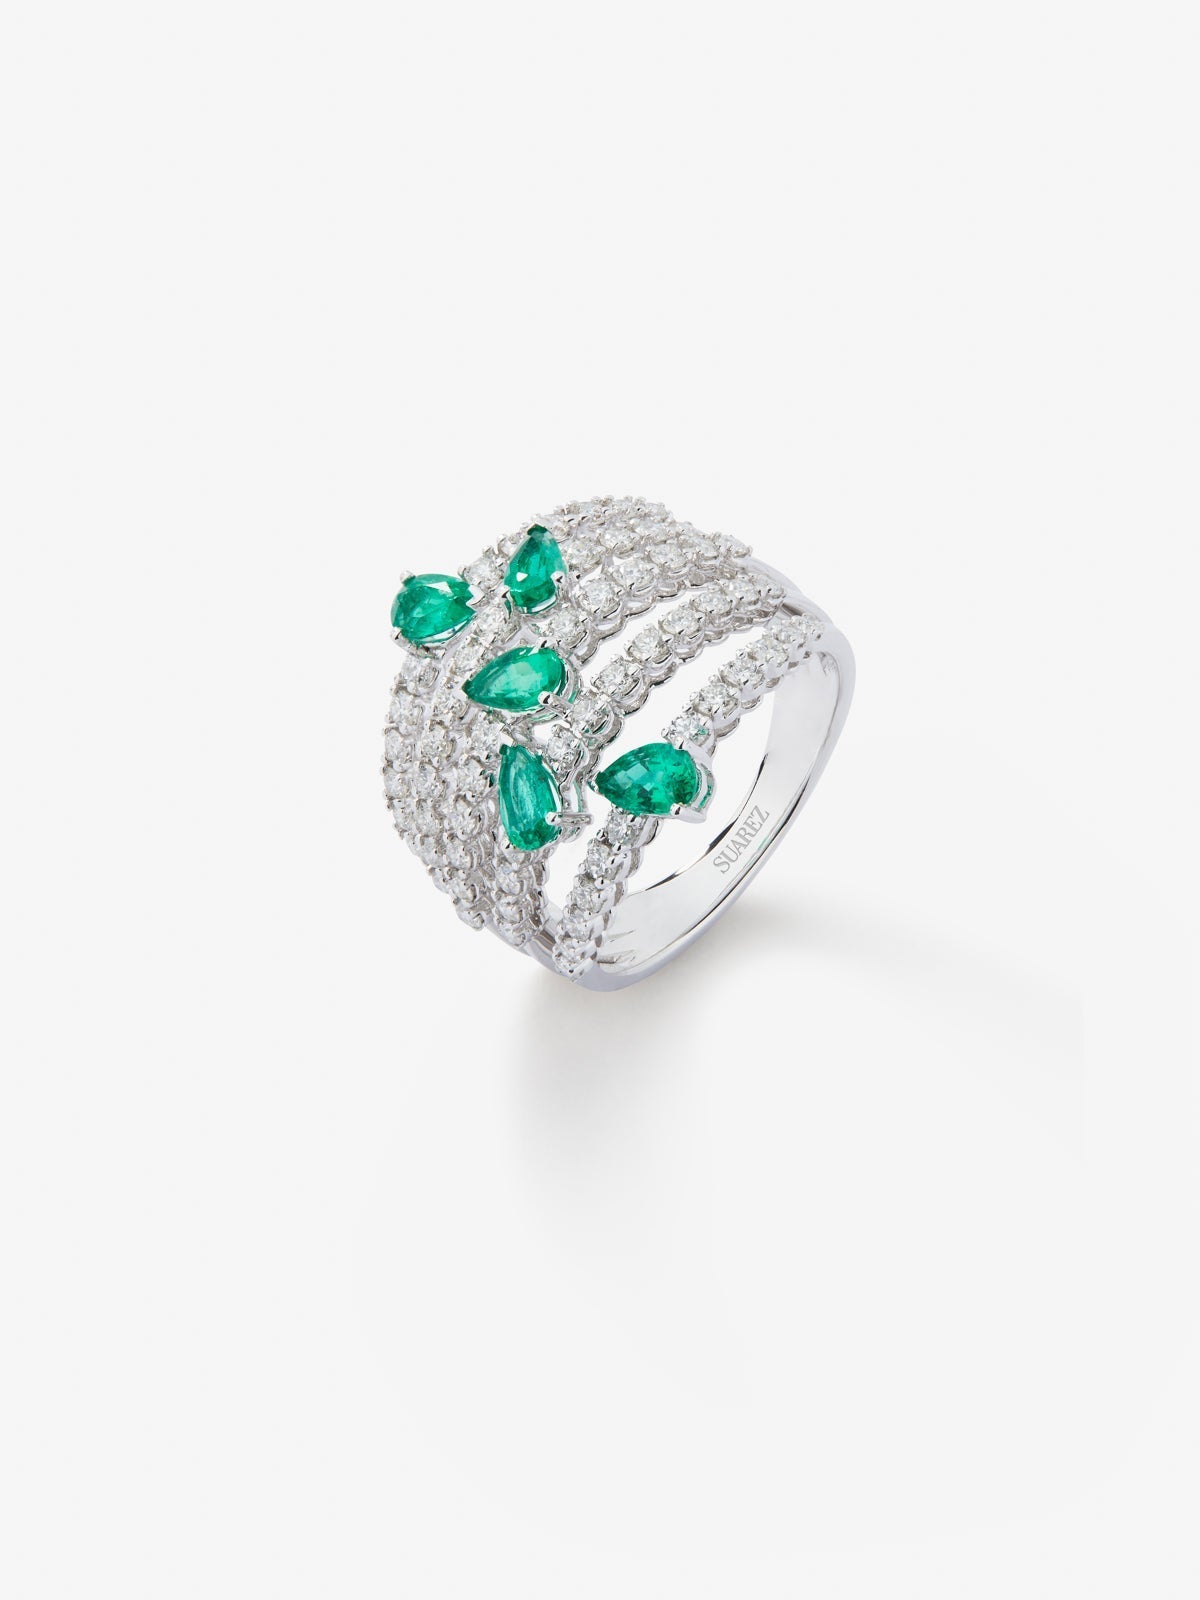 18K White Gold Ring with white diamonds in bright size 1.02 cts and green emeralds in 0.92 cts pear size